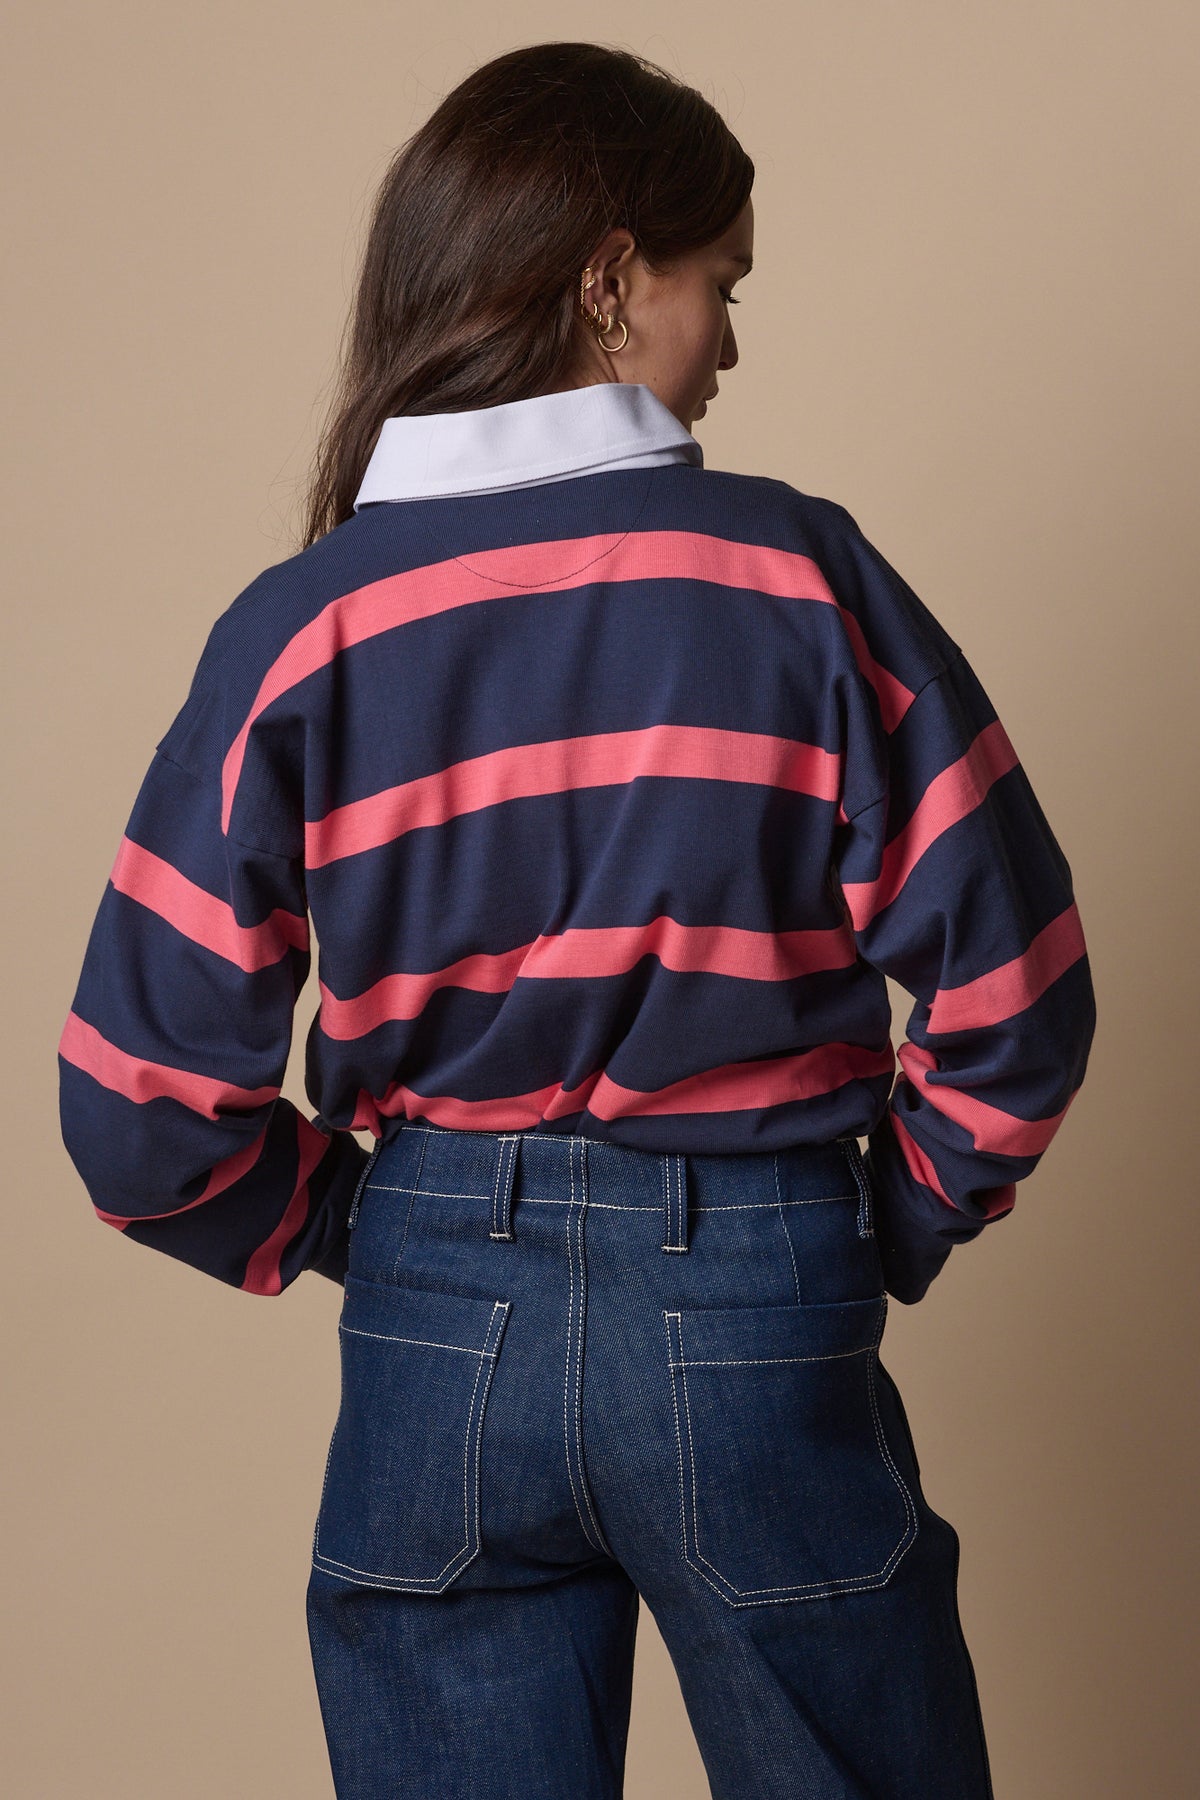 
            Back of female wearing striped rugby shirt in navy pink